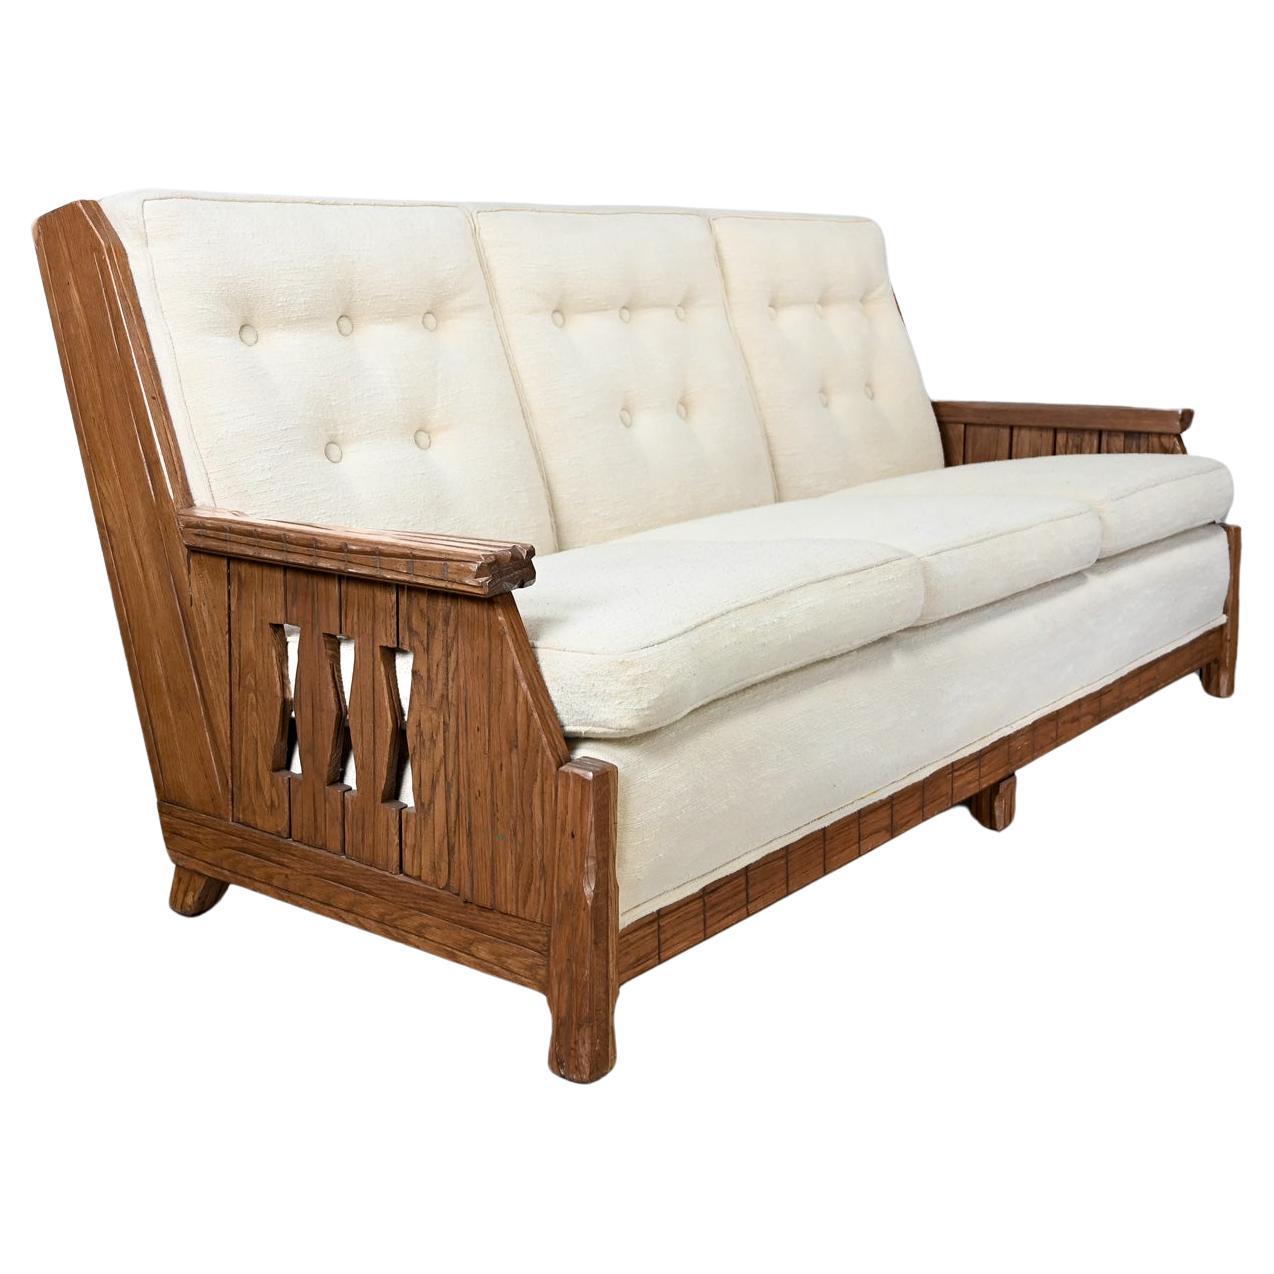 Mid-20th Century Rustic or Western Style Sofa Attributed to A. Brandt Ranch Oak For Sale